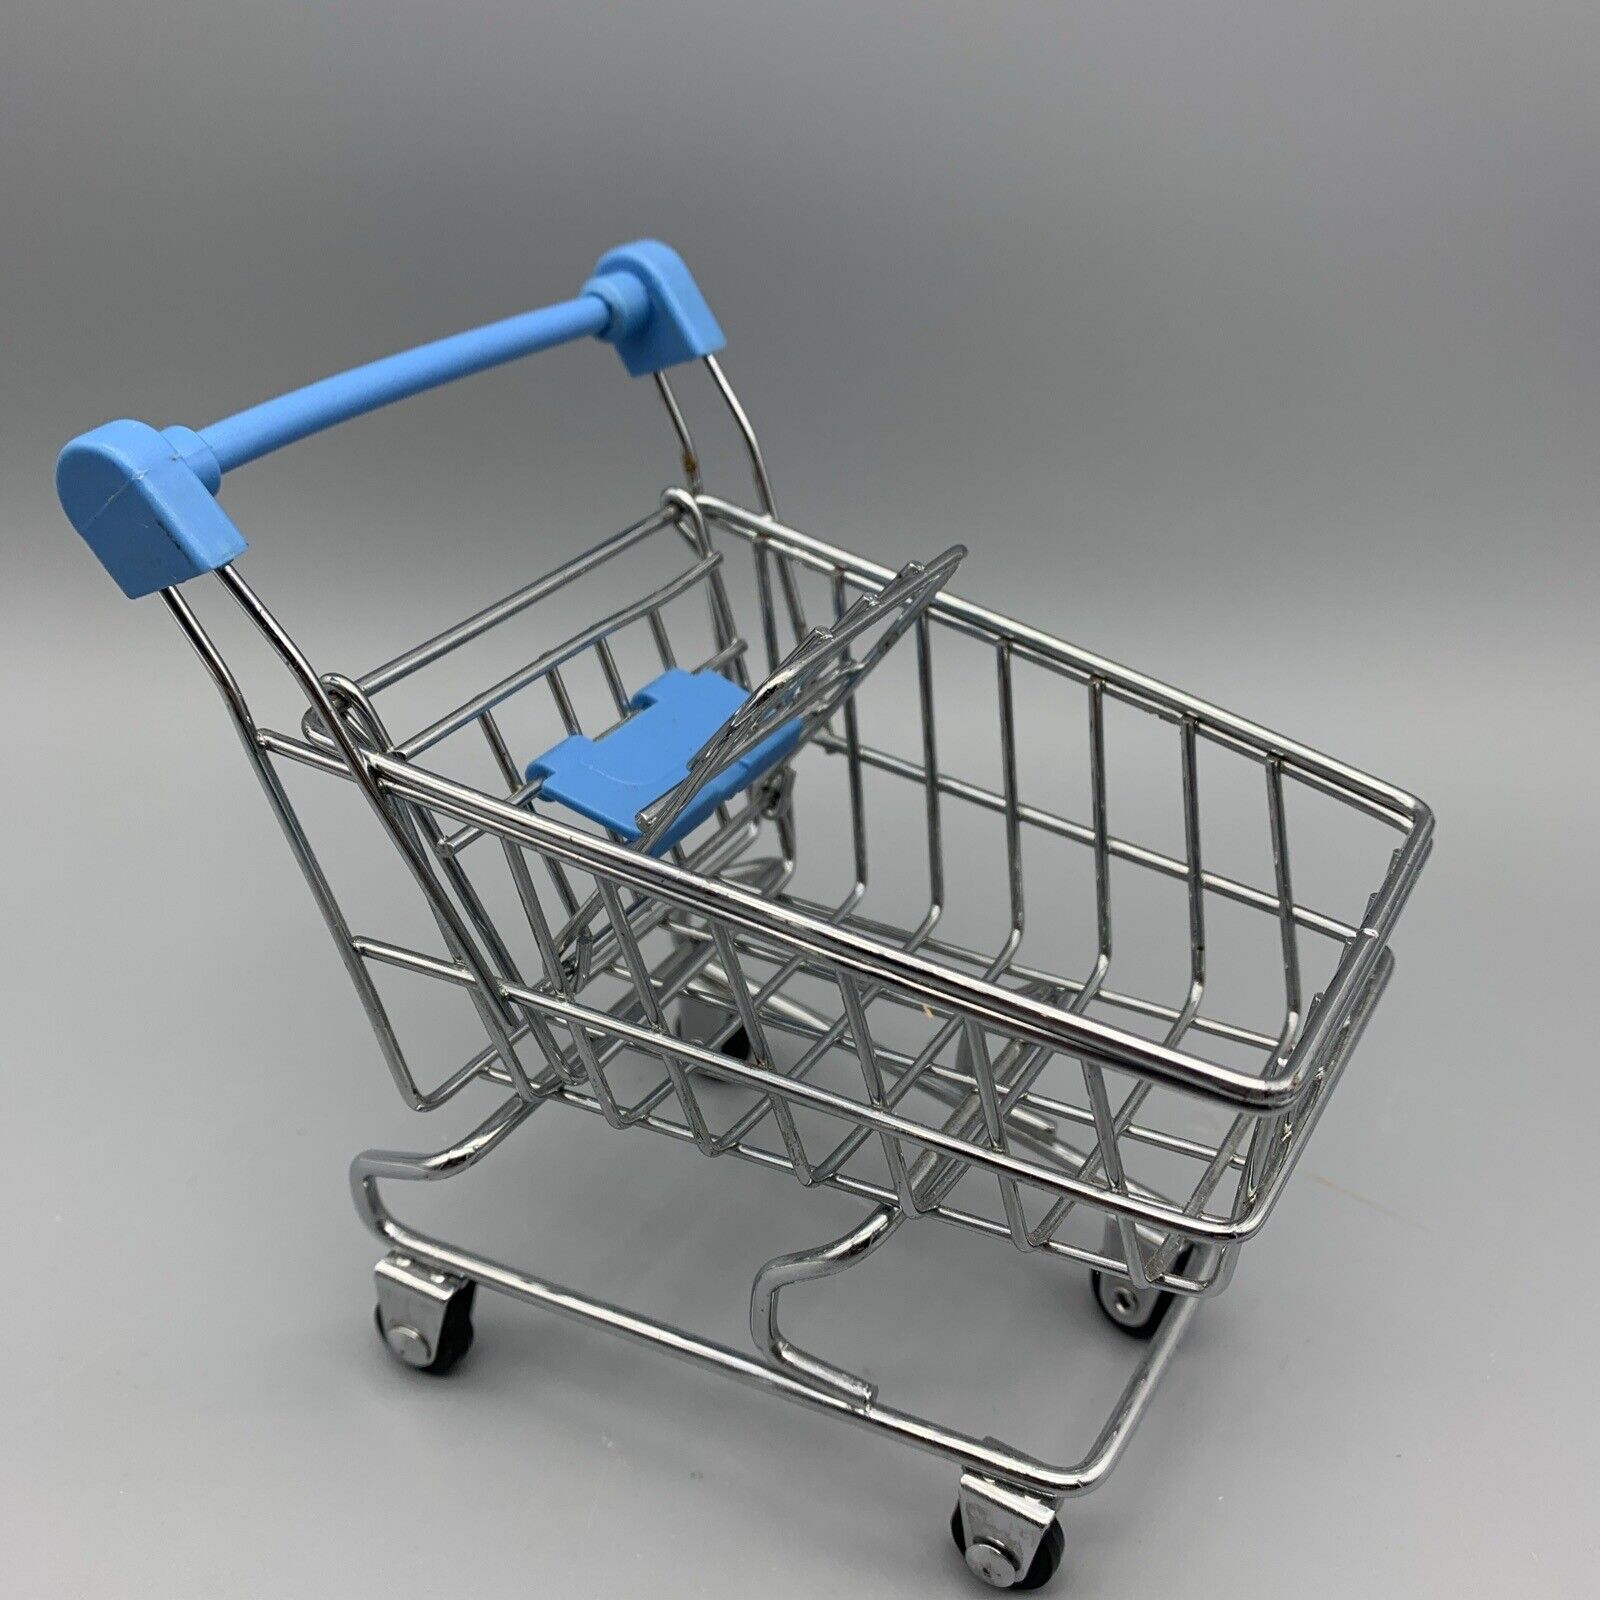 Metal Grocery Cart Mini Doll Sized Silver and Blue Small Shopping Cart